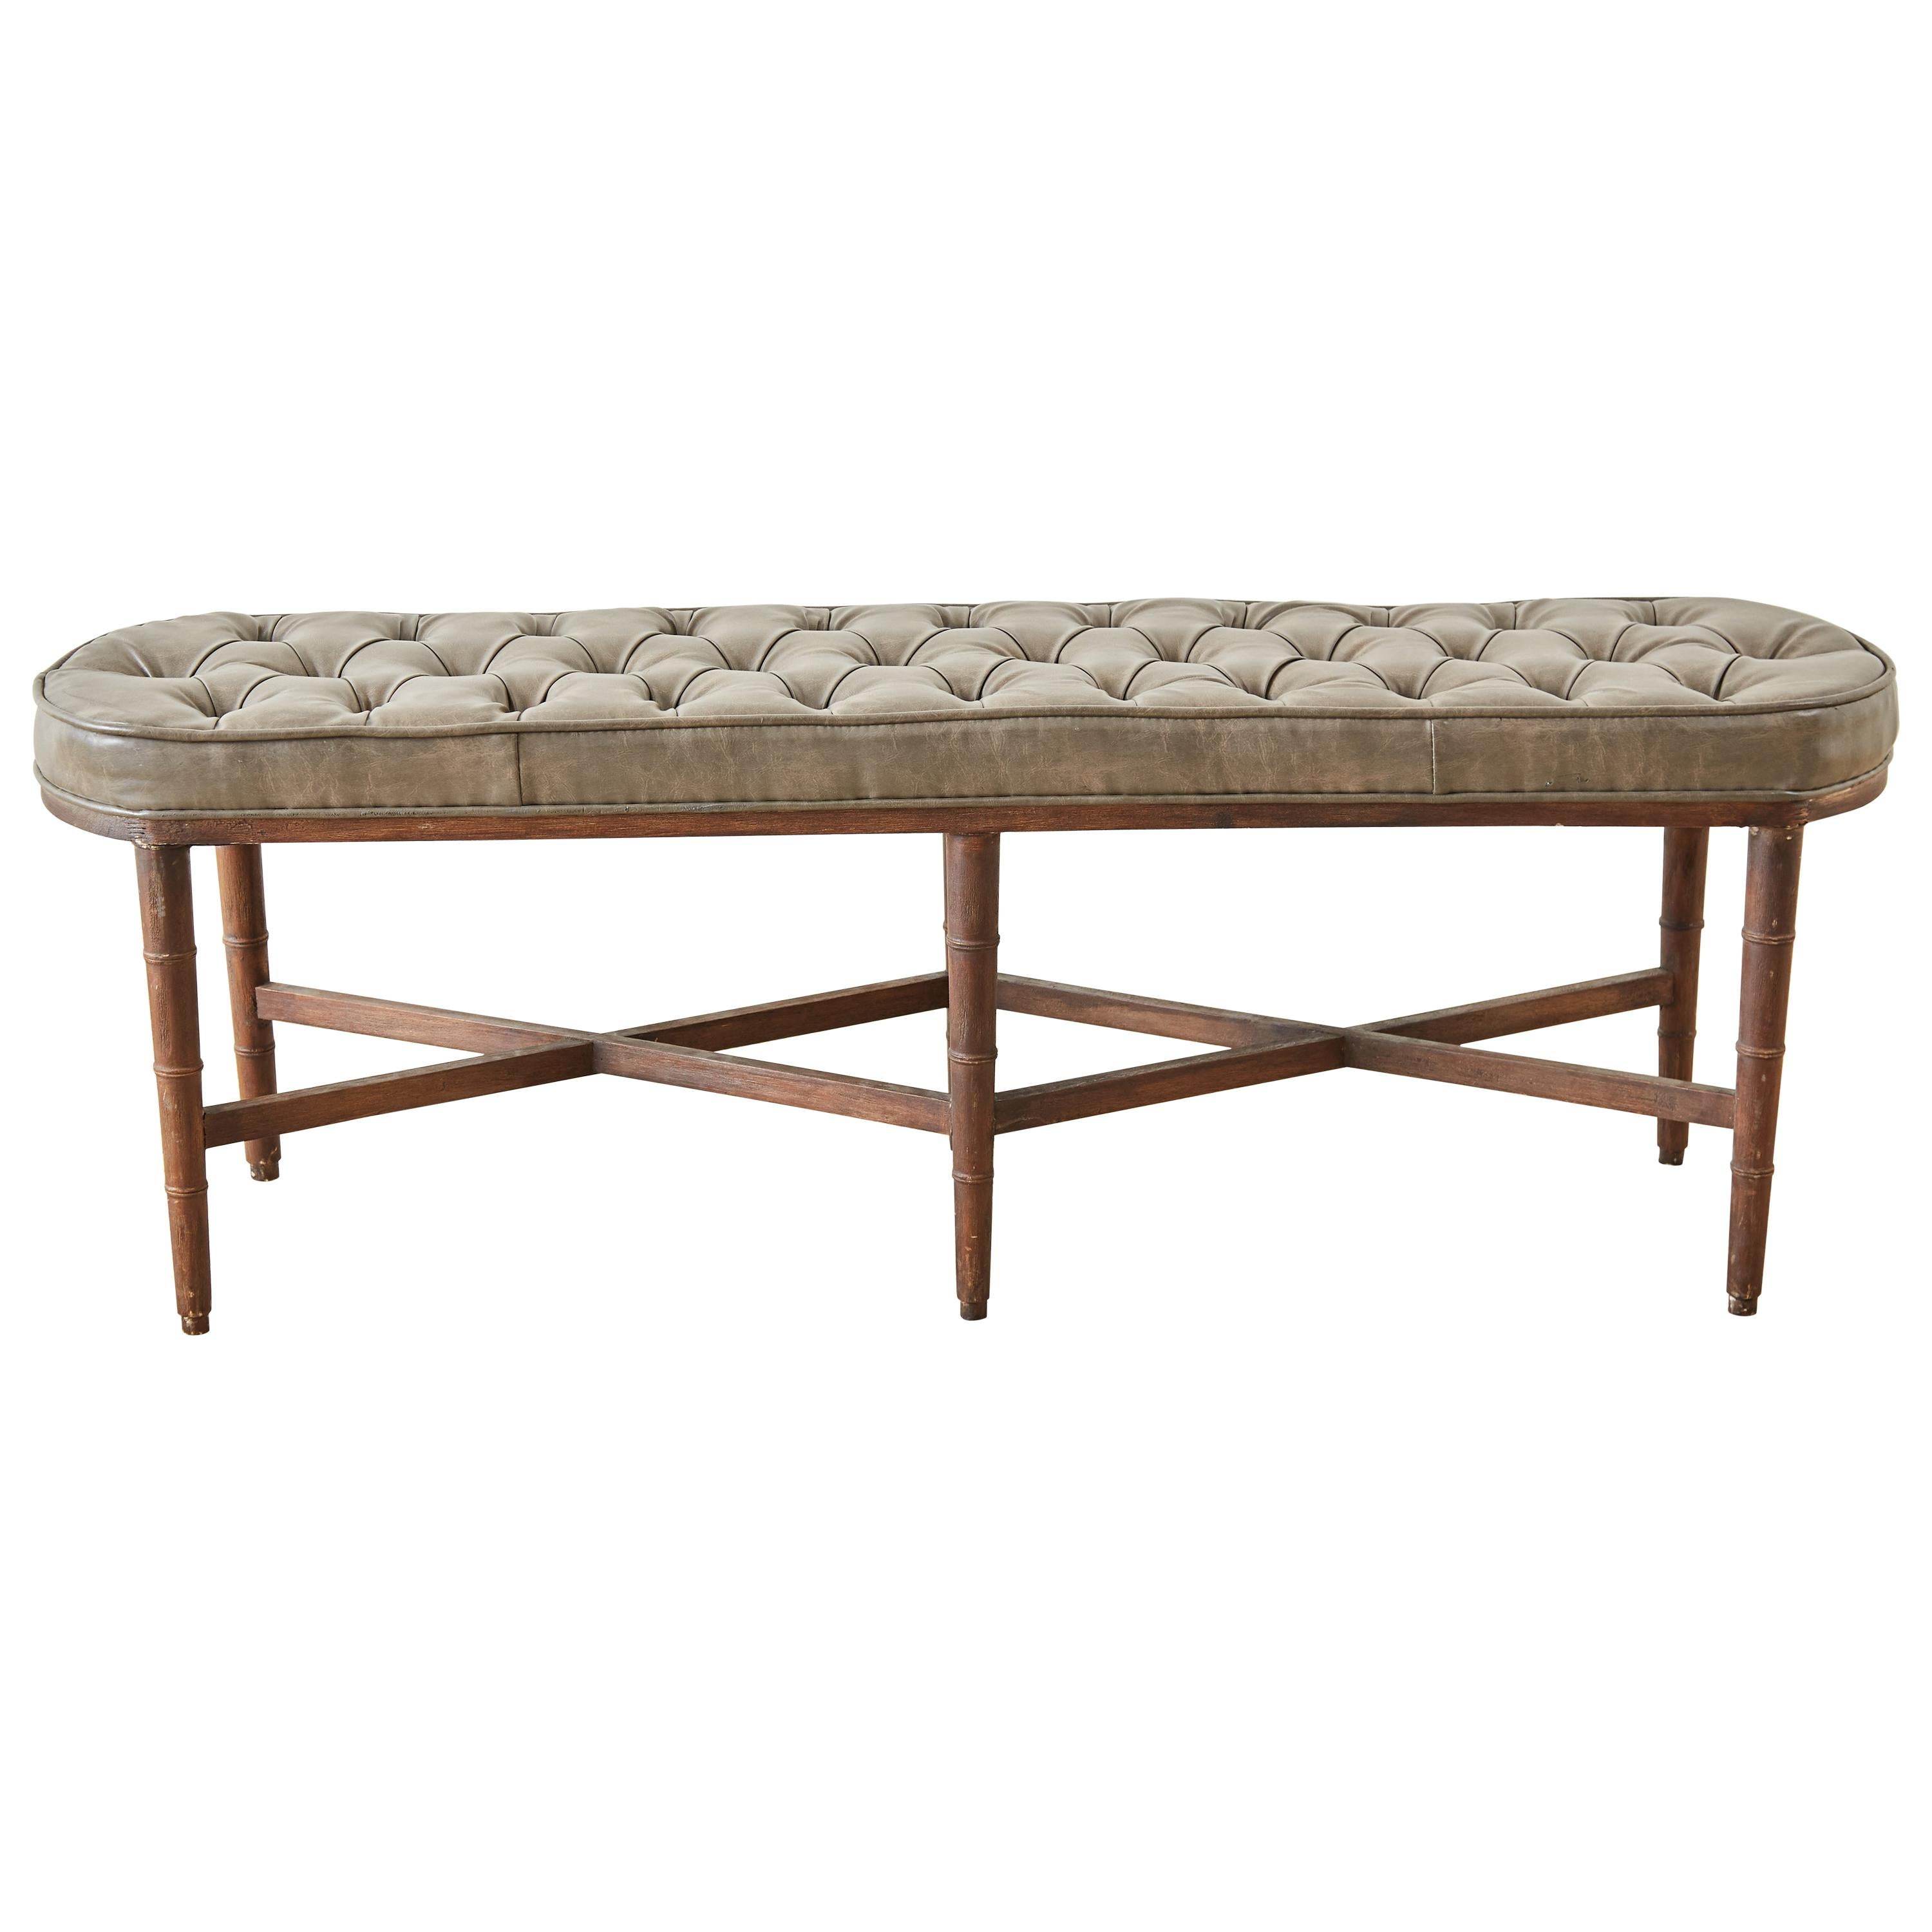 Midcentury Regency Style Faux Bamboo Tufted Bench